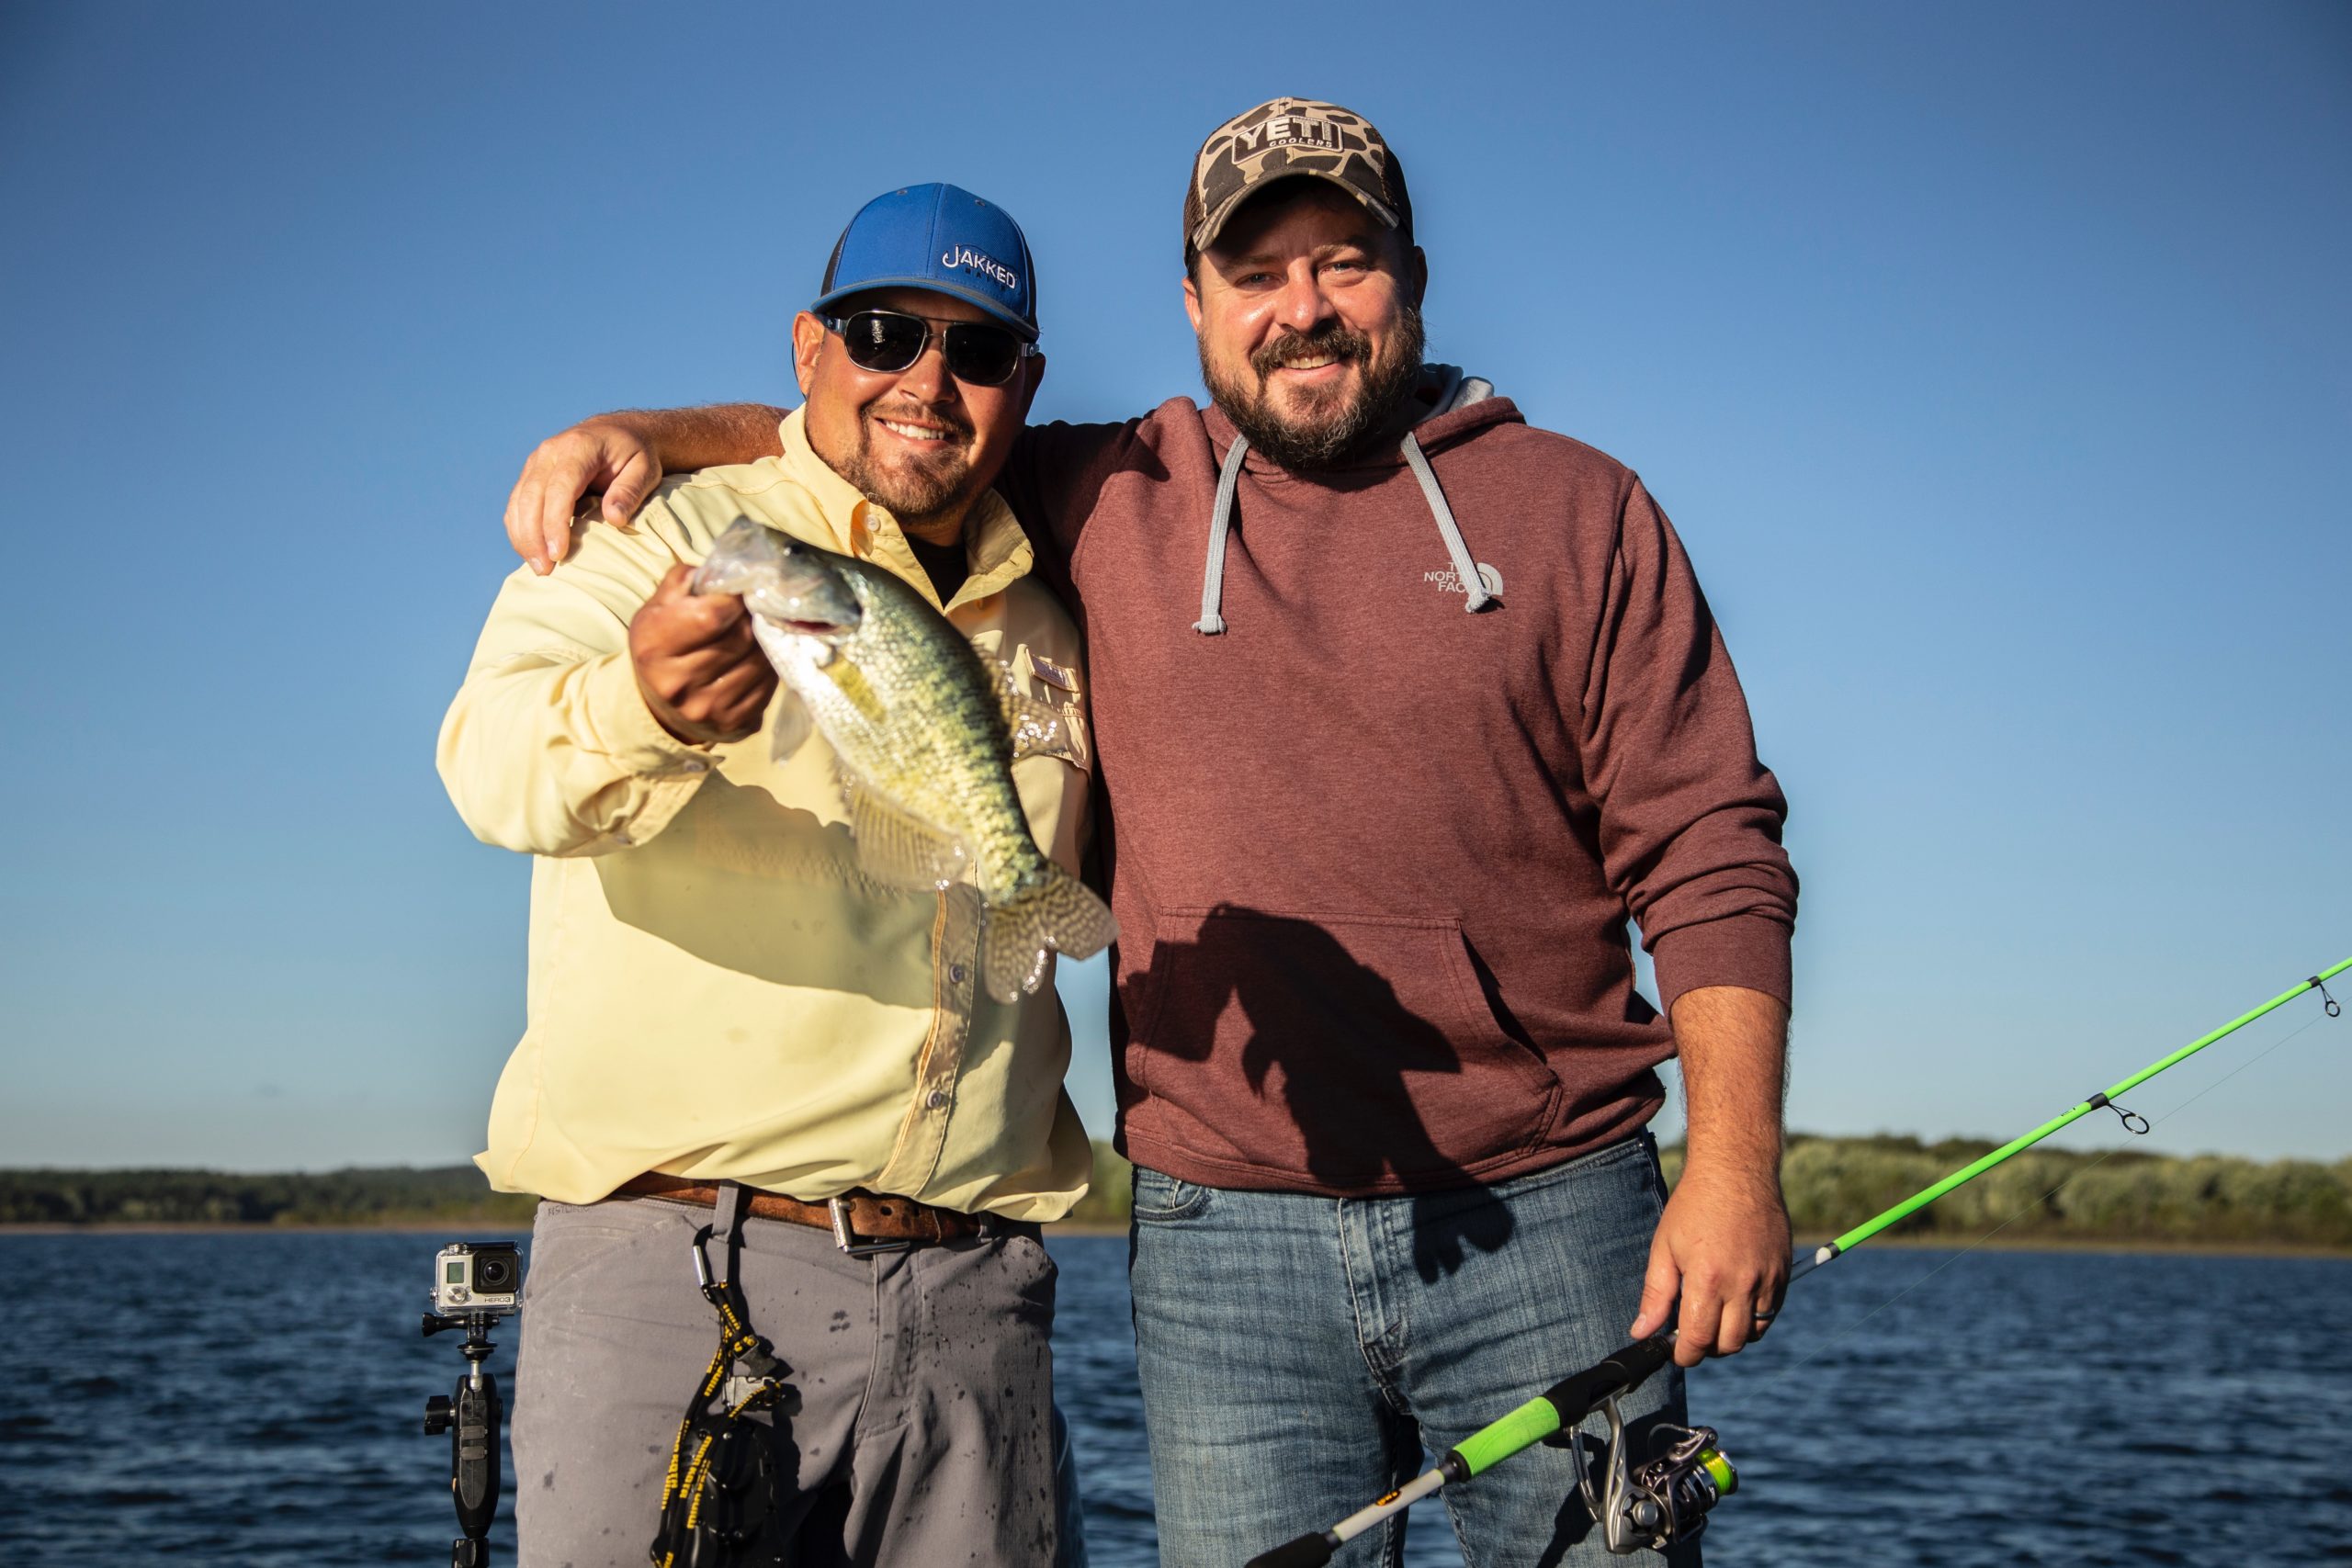 Stockton Lake Might Be the Best Lake You've Never Fished